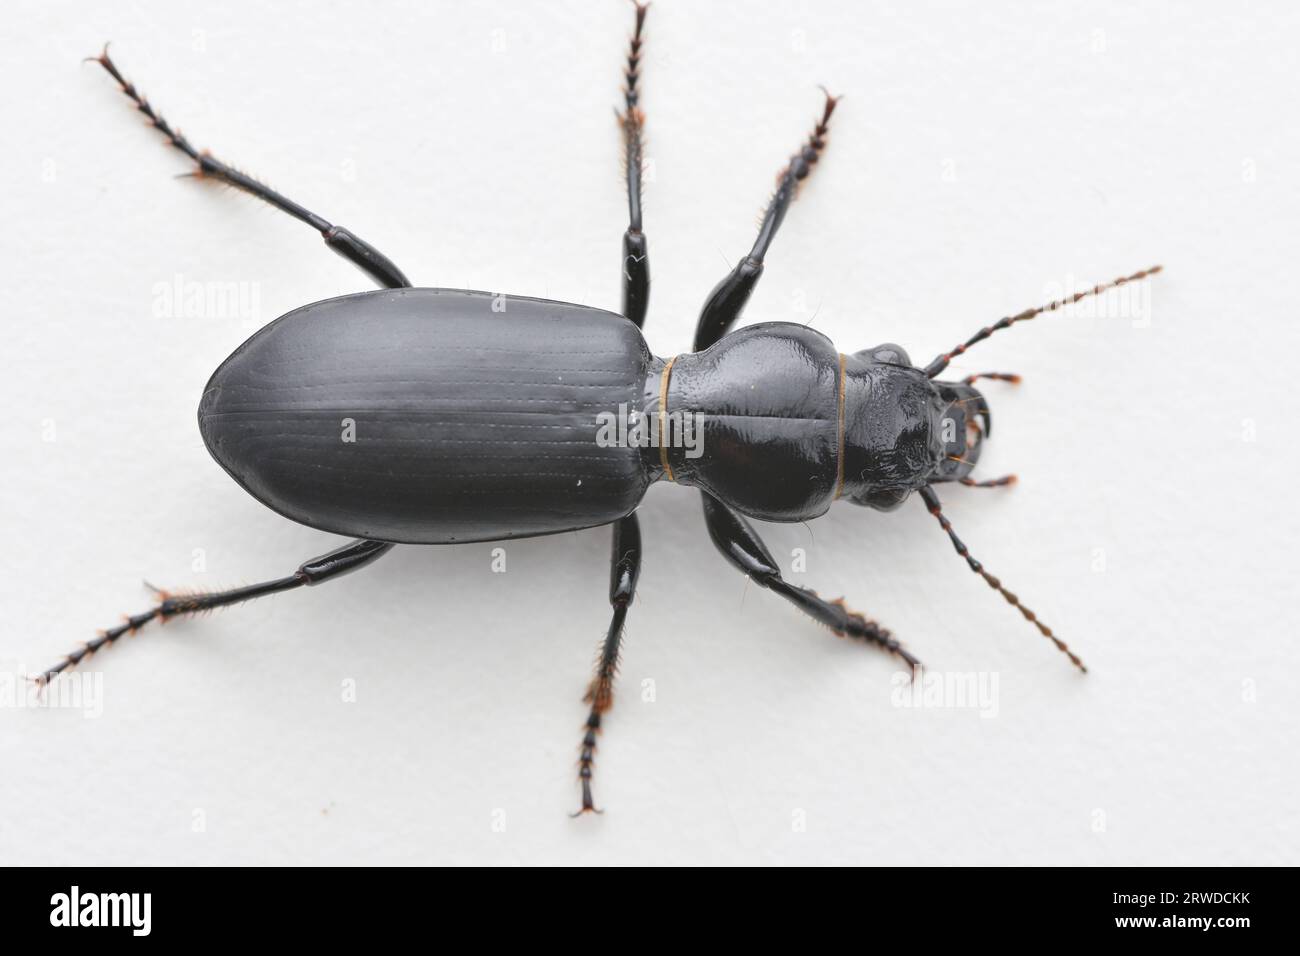 Dorsal view of a black and shiny Ground Beetle, standing on bark (Broscus cephalotes) Stock Photo